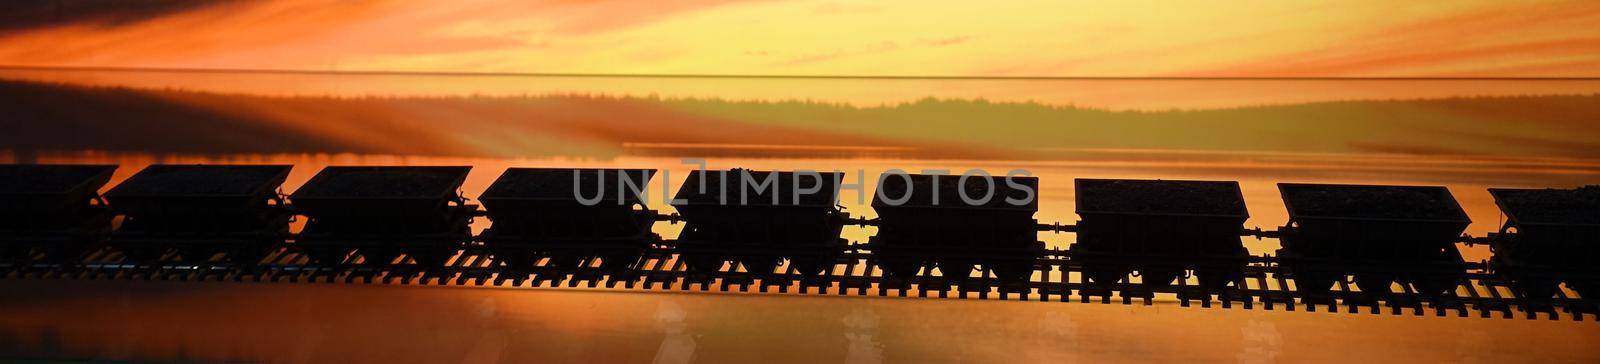 the wagons of a freight train parading on the rails during sunset by Jamaladeen